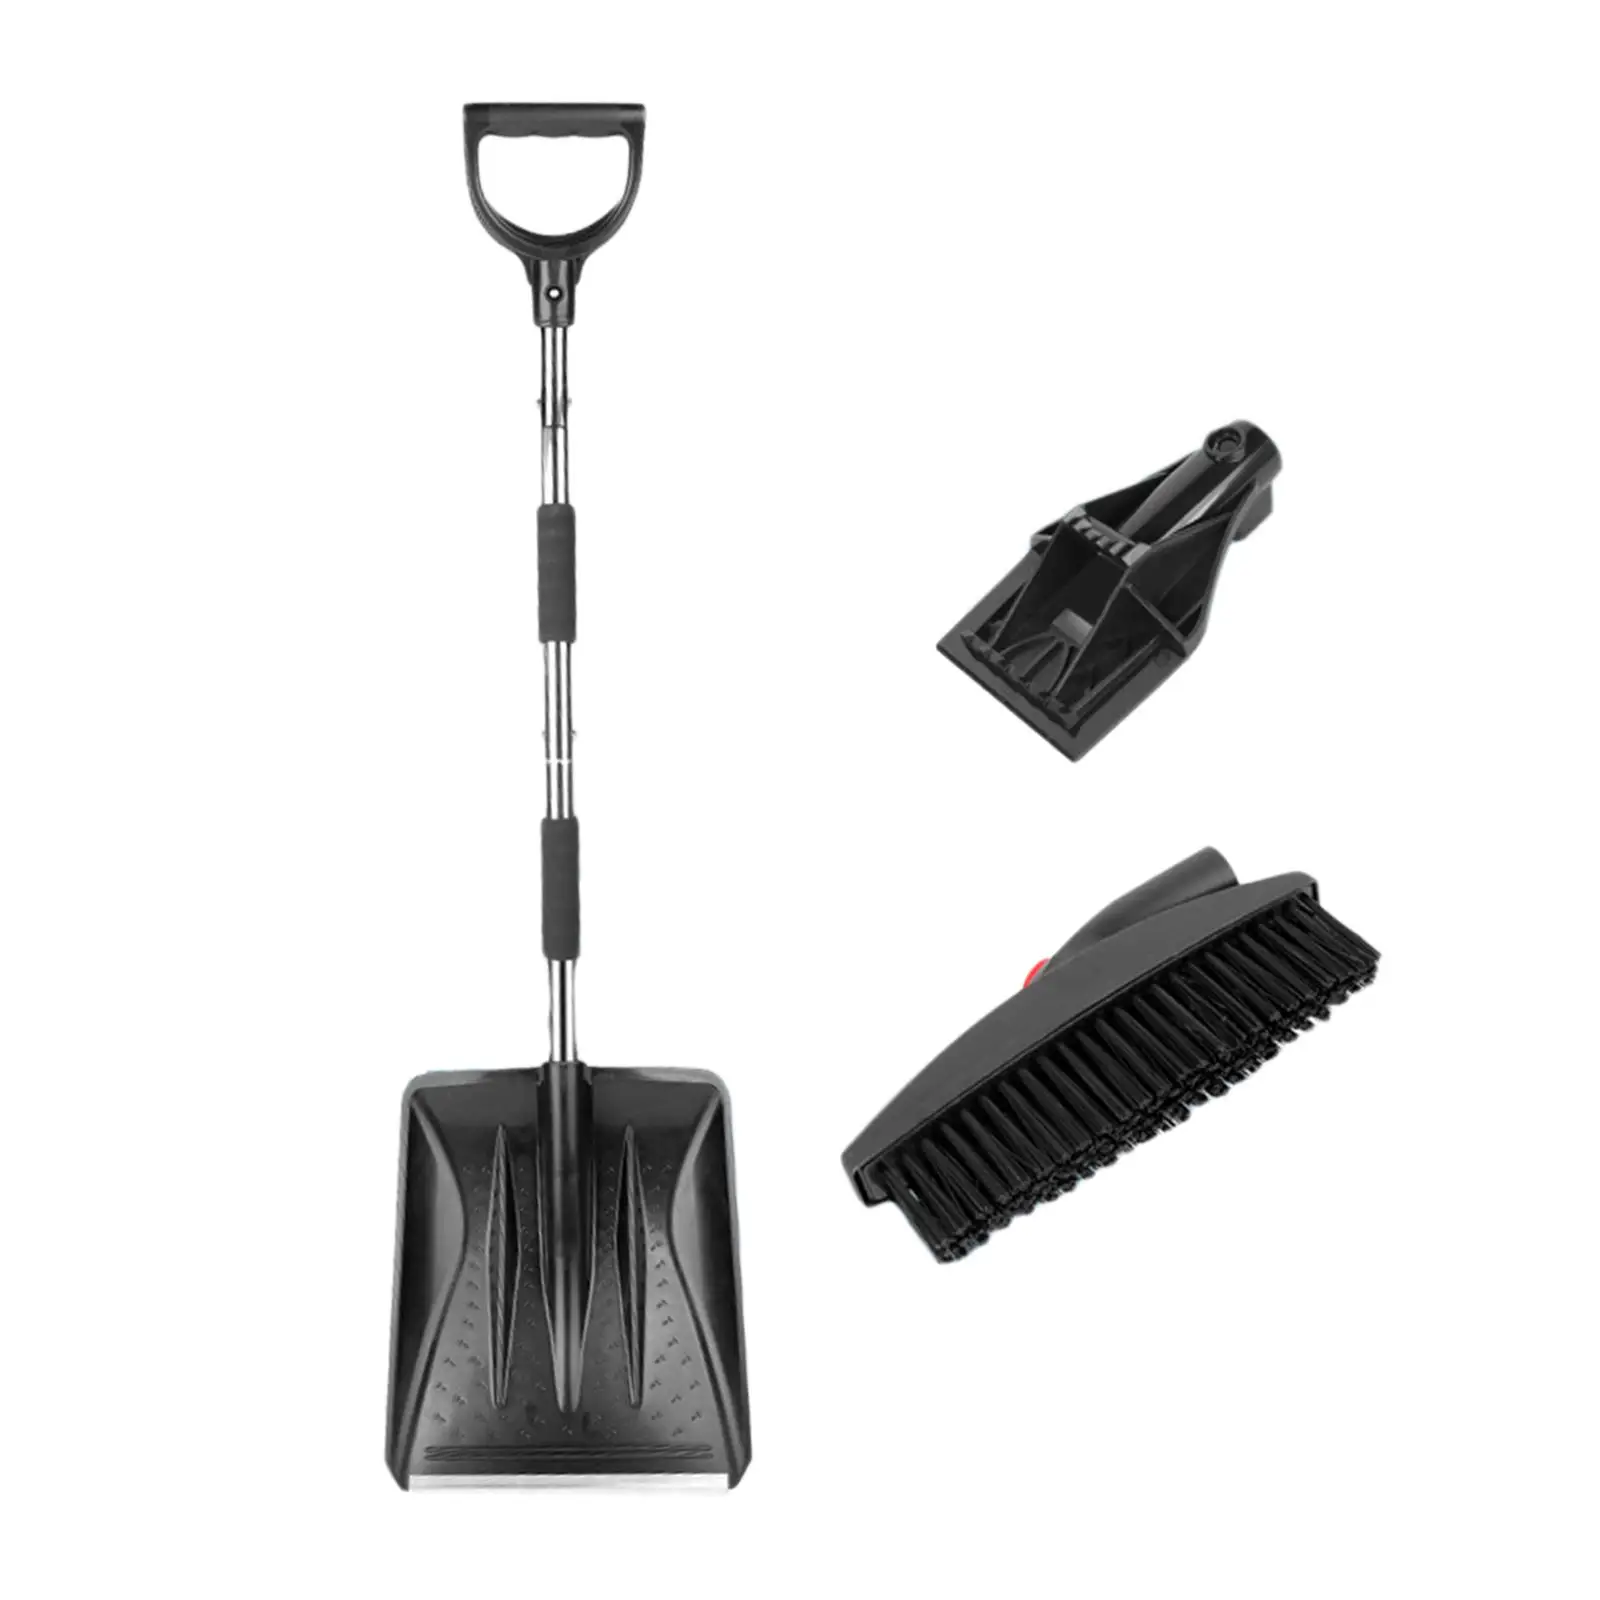 Snow Brush Snow Spade for Car, Snow Removal Tools 360 Degree Rotating Head Car Window Snow Cleaner for Auto Car